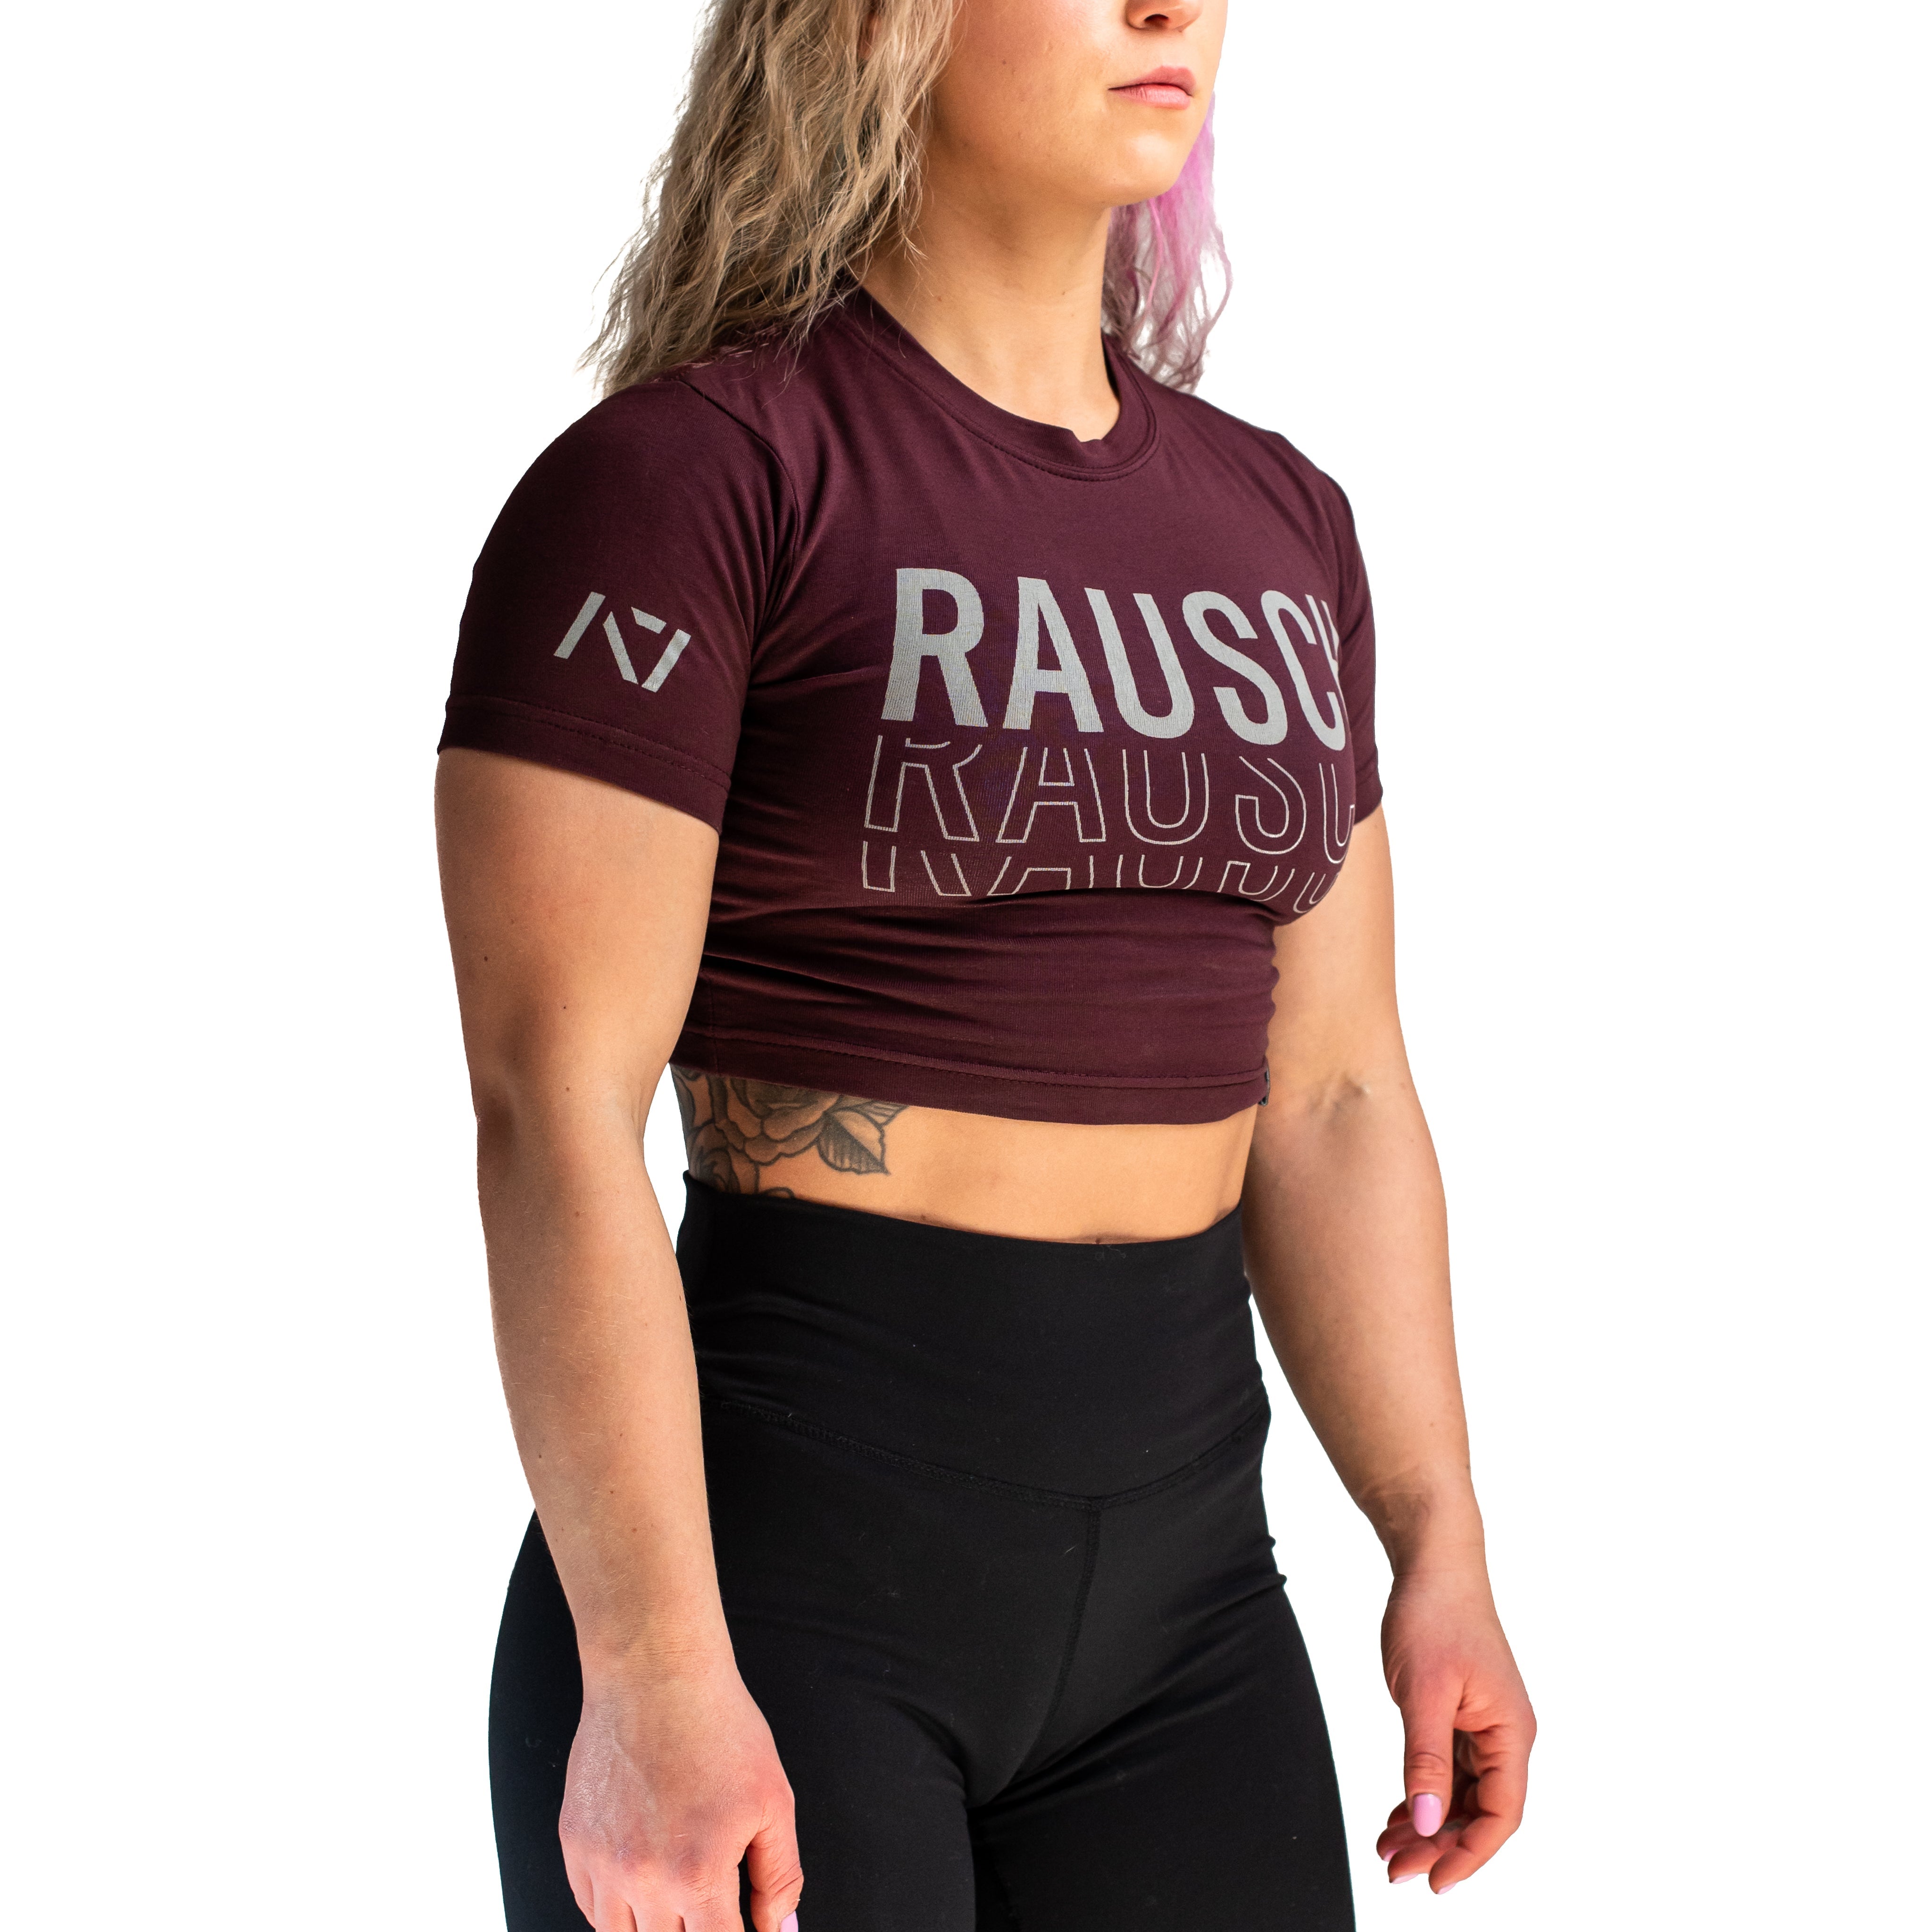 Rausch Bar Grip Crop, great as a squat shirt. Purchase Rausch Bar Grip t-shirt from A7 UK. Purchase Climb Bar Grip Shirt Europe from A7 Europe. No more chalk and no more sliding. Best Bar Grip T shirts, shipping to UK and Europe from A7 UK. A7UK has the best Powerlifting apparel for all your workouts. Available in UK and Europe including France, Italy, Germany, the Netherlands, Sweden and Poland.